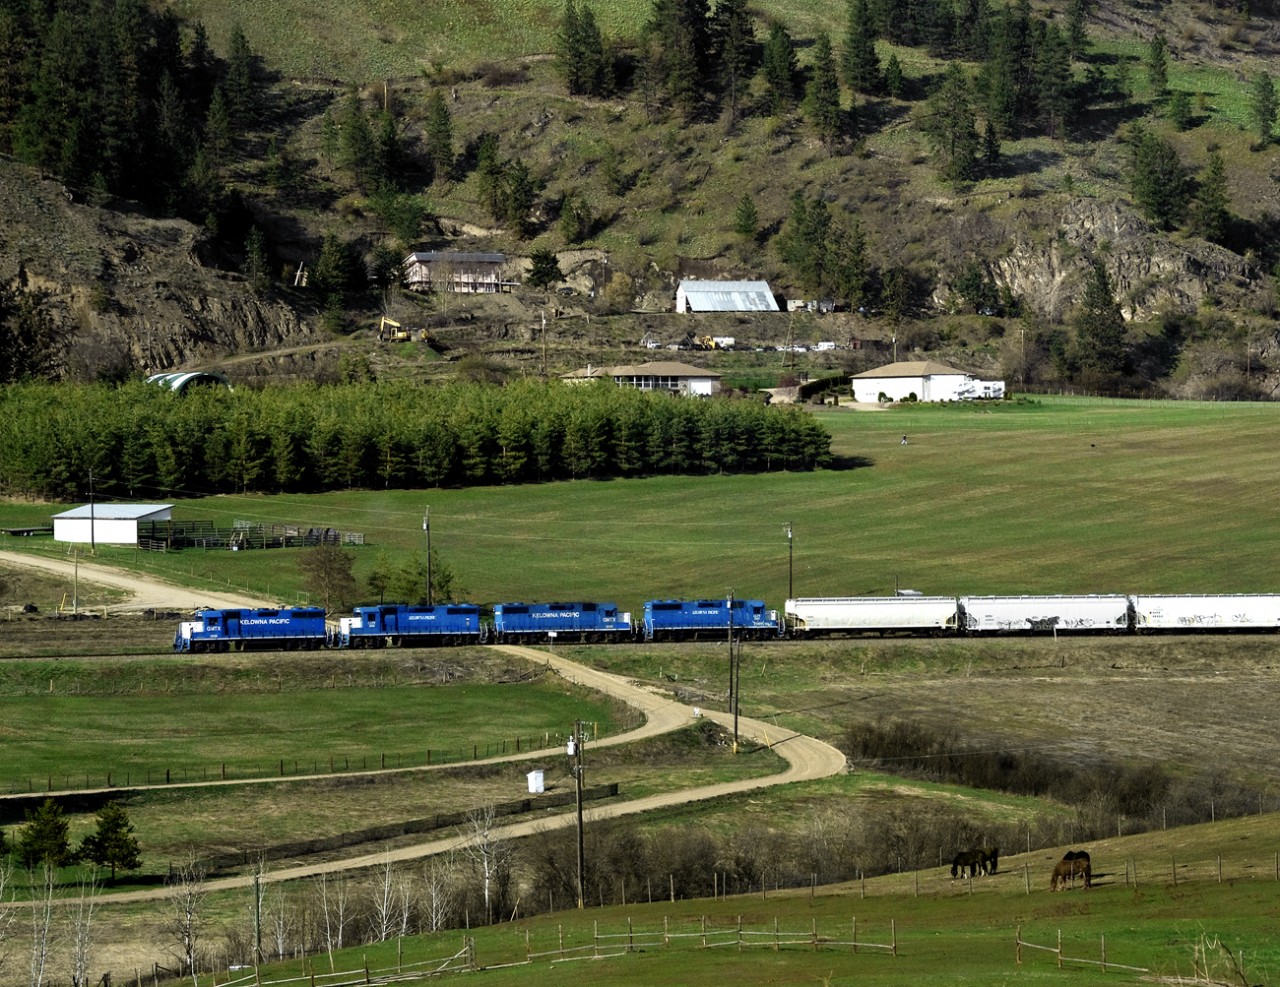 Westbound Kelowna Pacific Vernon to Kamloops tri weekly job rolls through the scenic Grandview Valley west of Armstrong on this former CN line. KP declared bankruptcy in June and CN is planning to take the line fall 2013 but wont reopen the Vernon Kelowna section.